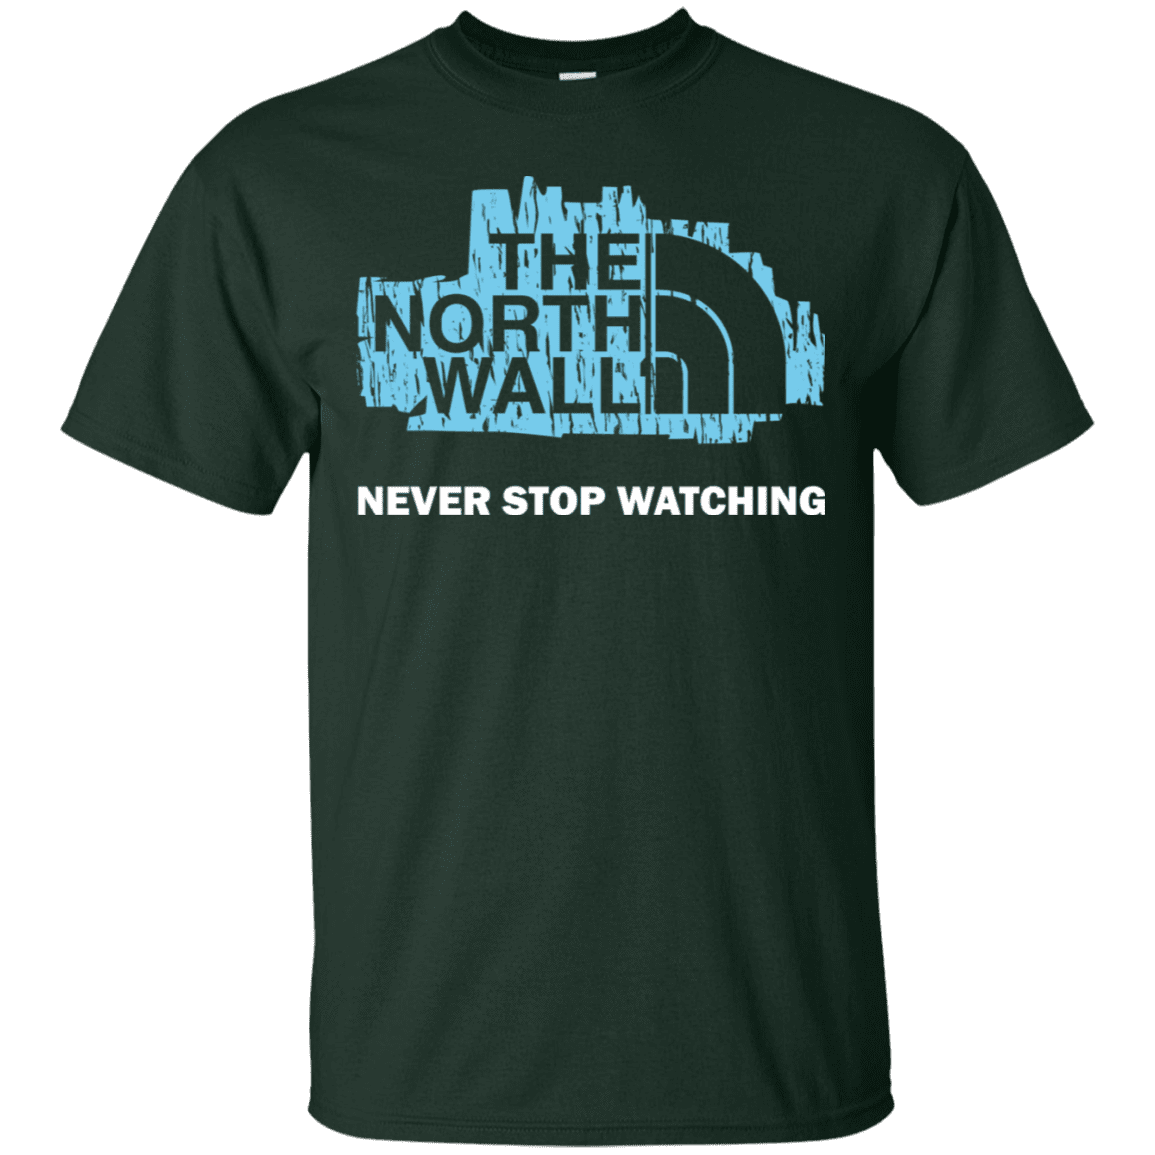 T-Shirts Forest / S The North Wall T-Shirt